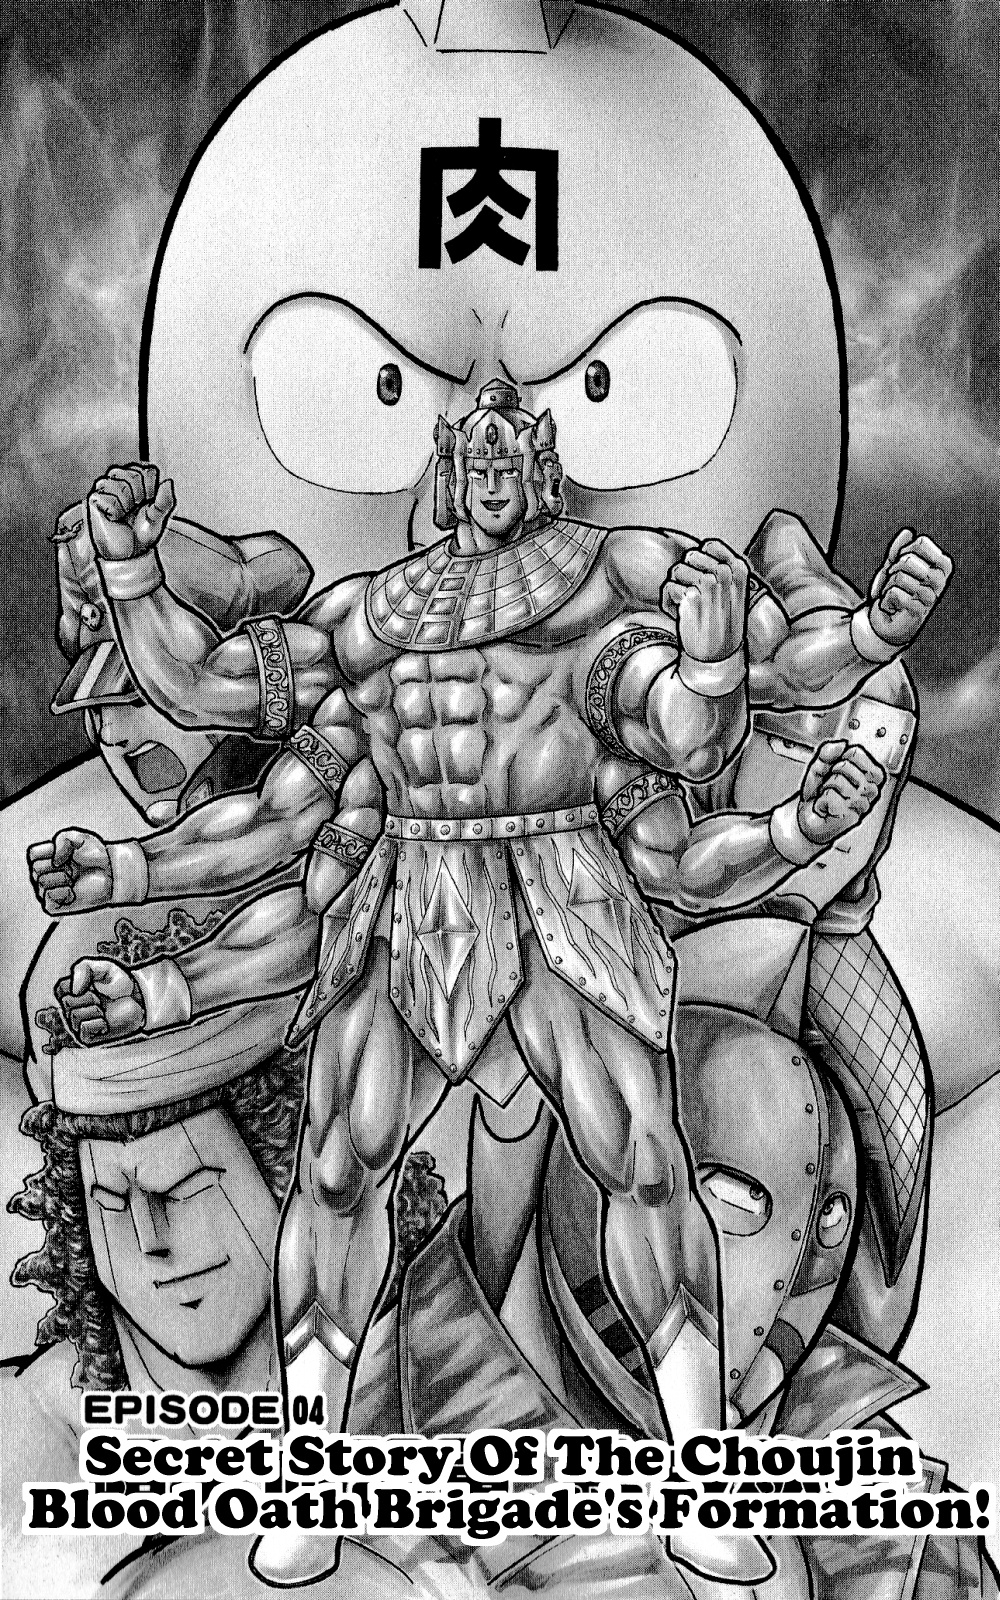 Kinnikuman One Shot Collection (2011-2014) Vol.1 Chapter 4: Secret Story - The Choujin Blood Oath Brigade's Formation! - Picture 2